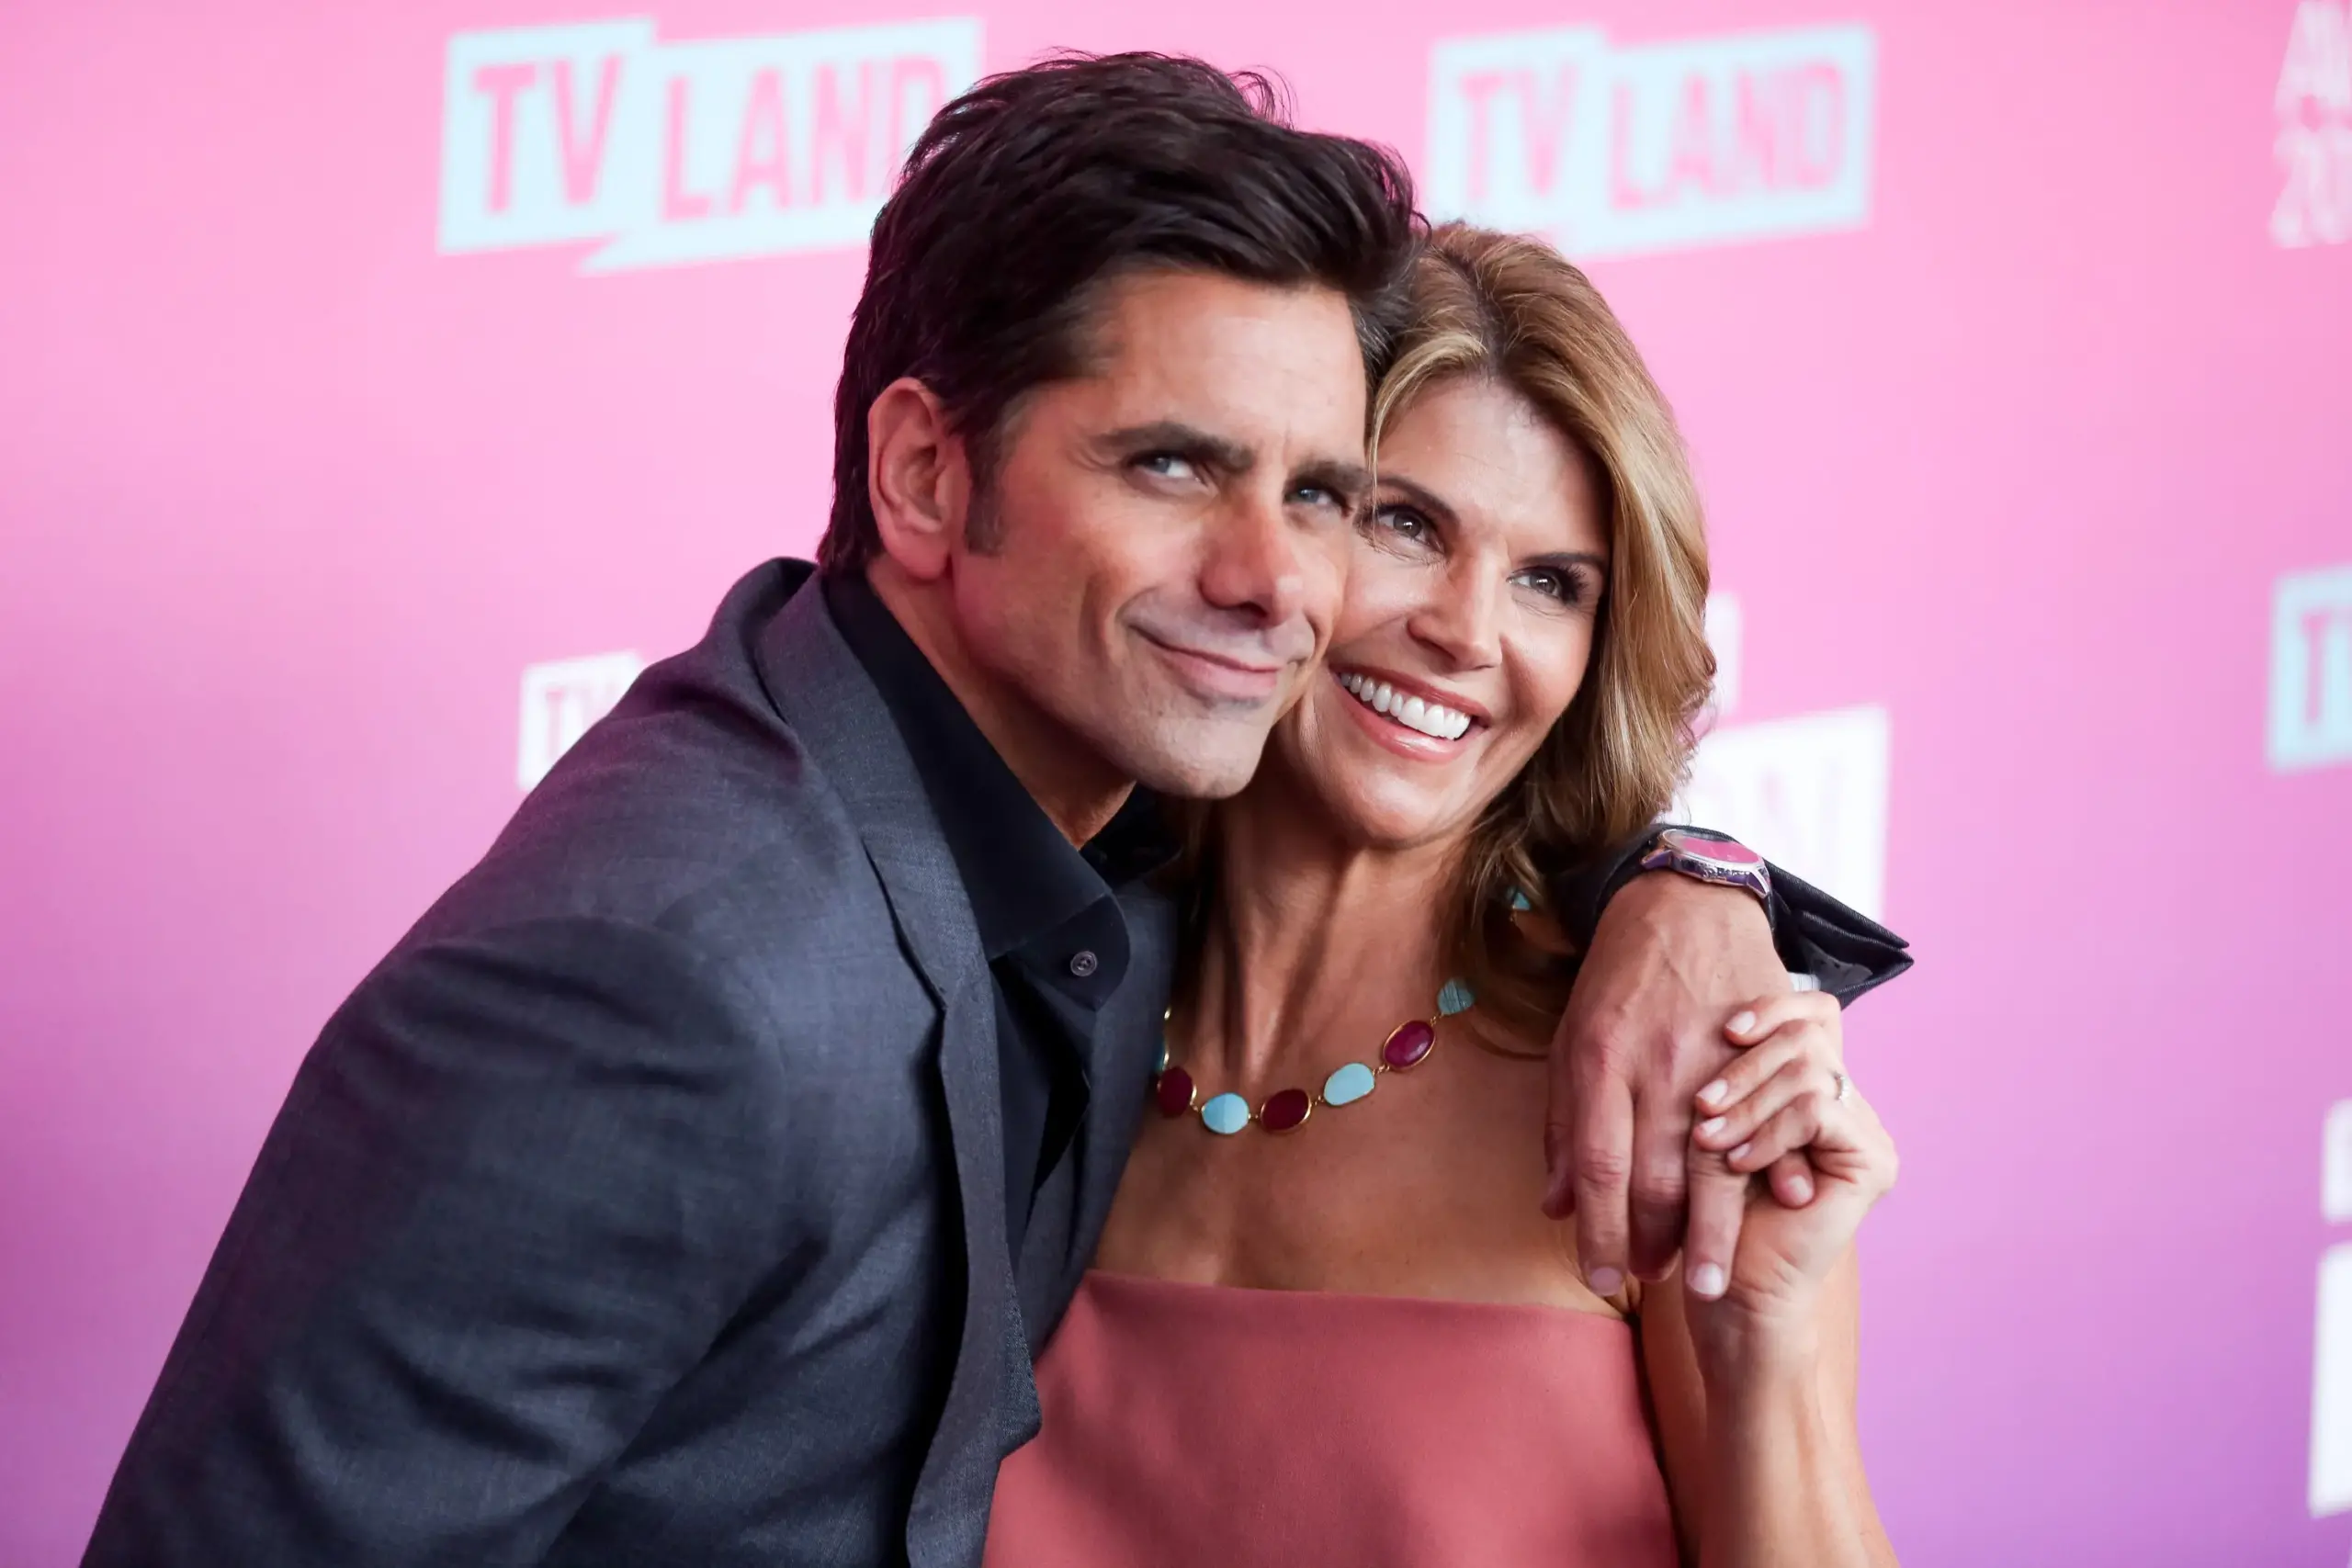 John Stamos and Lori Loughlin Dating, Breakup and New Relationships